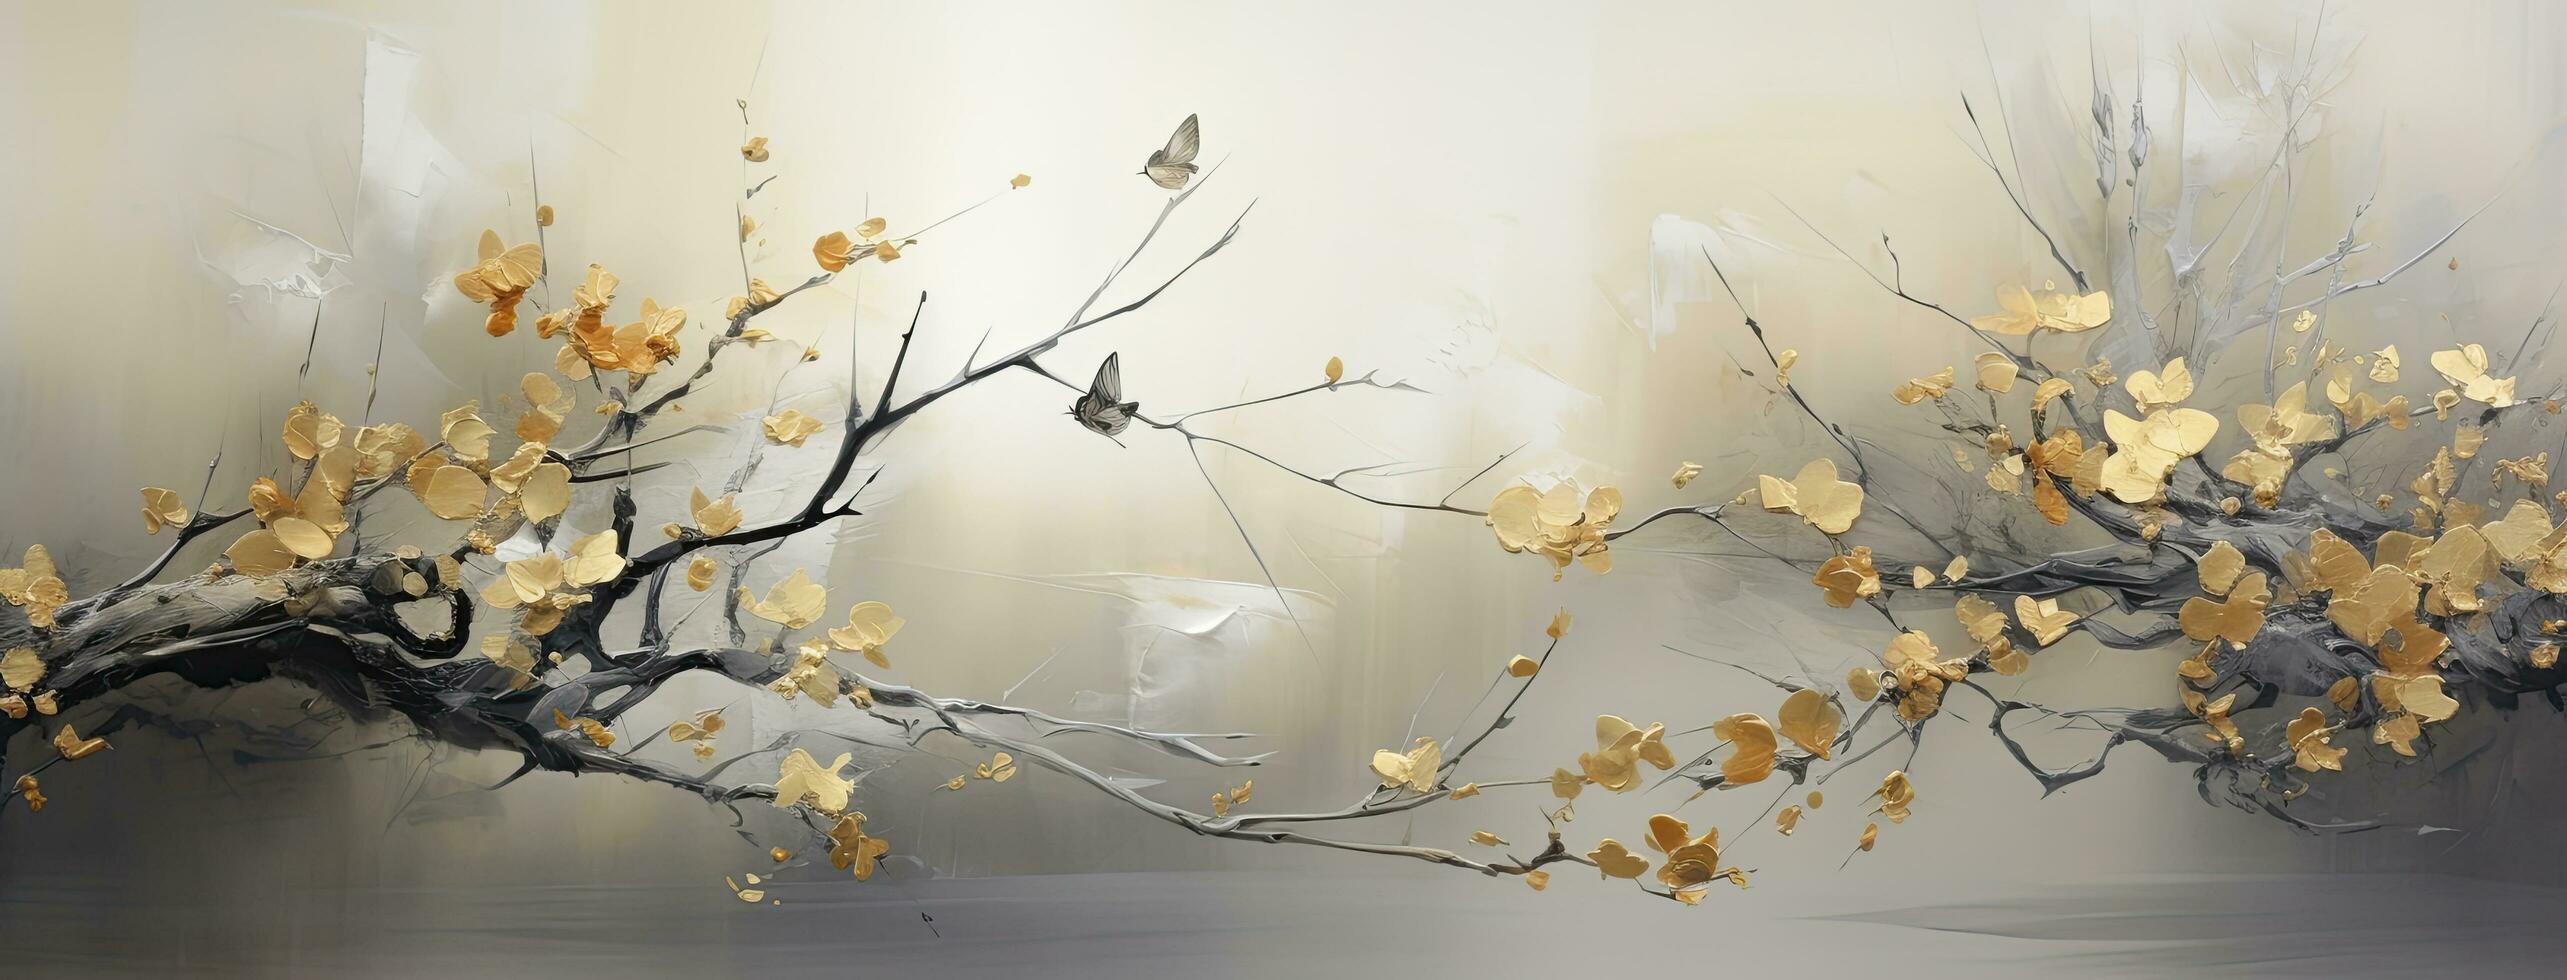 AI generated Golden Foliage Traditional Oil Painting Abstract in Grey and Beige Textured Tones, Featuring Gold Foliage Against a Rich Black Canvas. photo